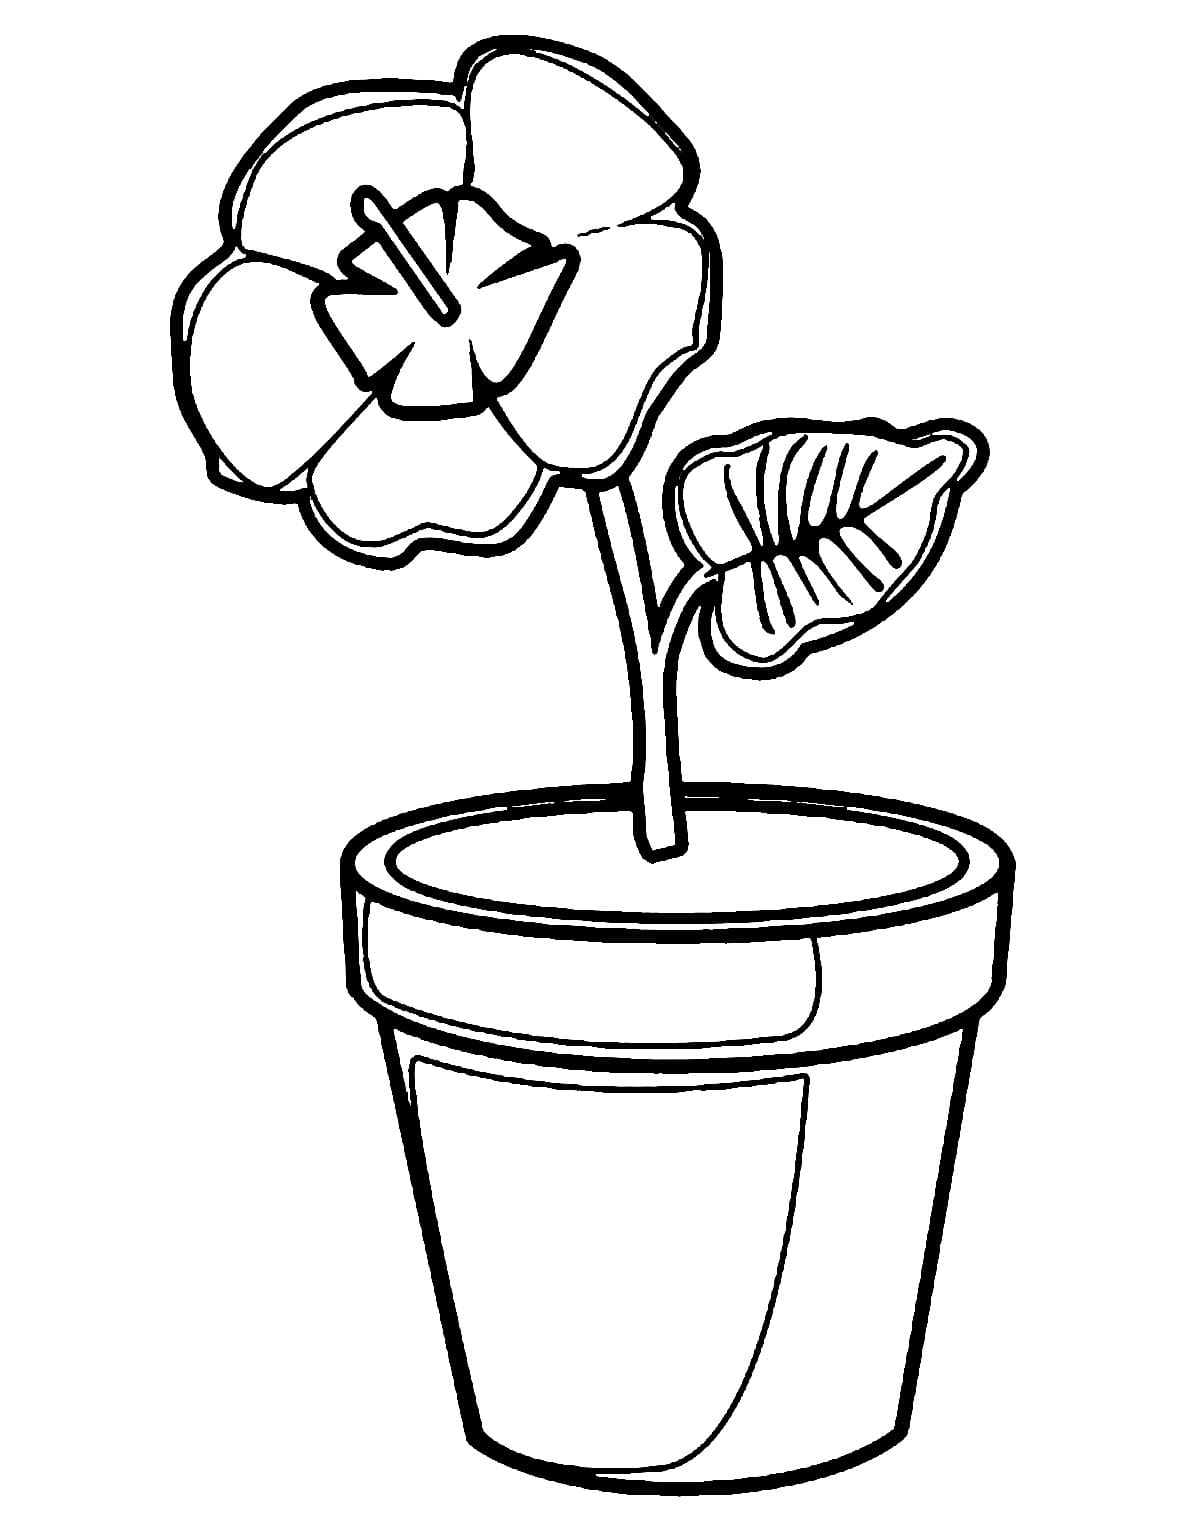 Flower Pot Printable For Kids coloring page Download Print or Color